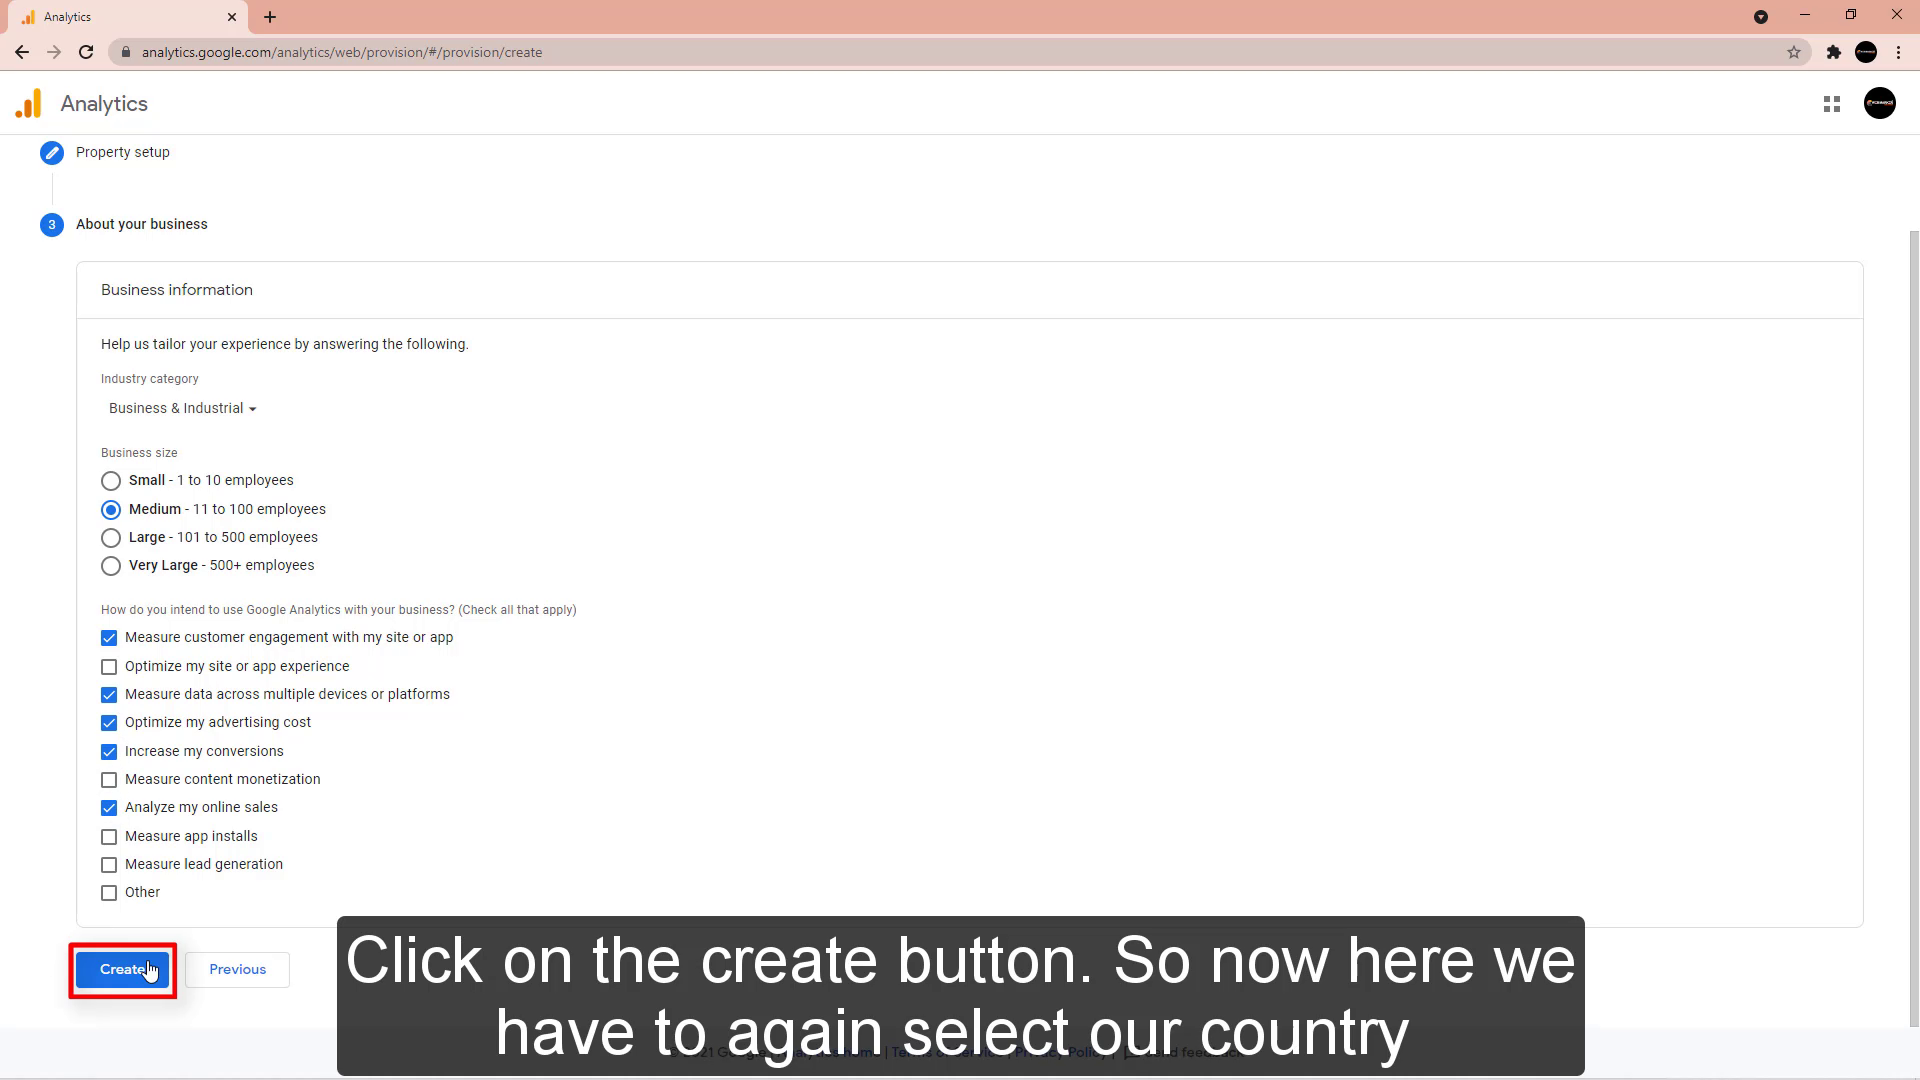 Click on the create button.